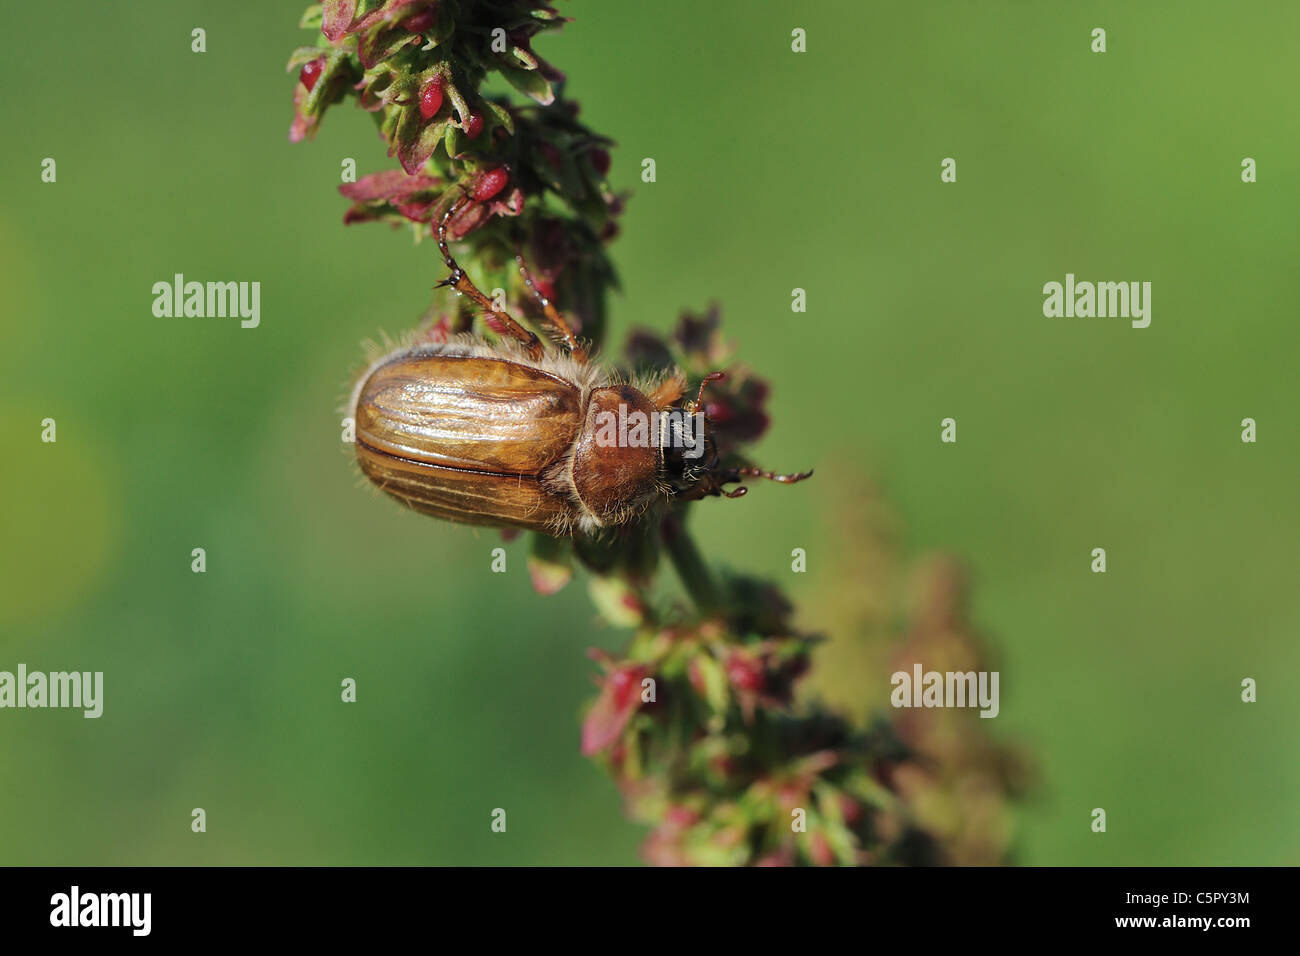 European June beetle - Summer chafer (Amphimallon solstitialis - Rhizotrogus solstitiale) on a plant at spring Stock Photo